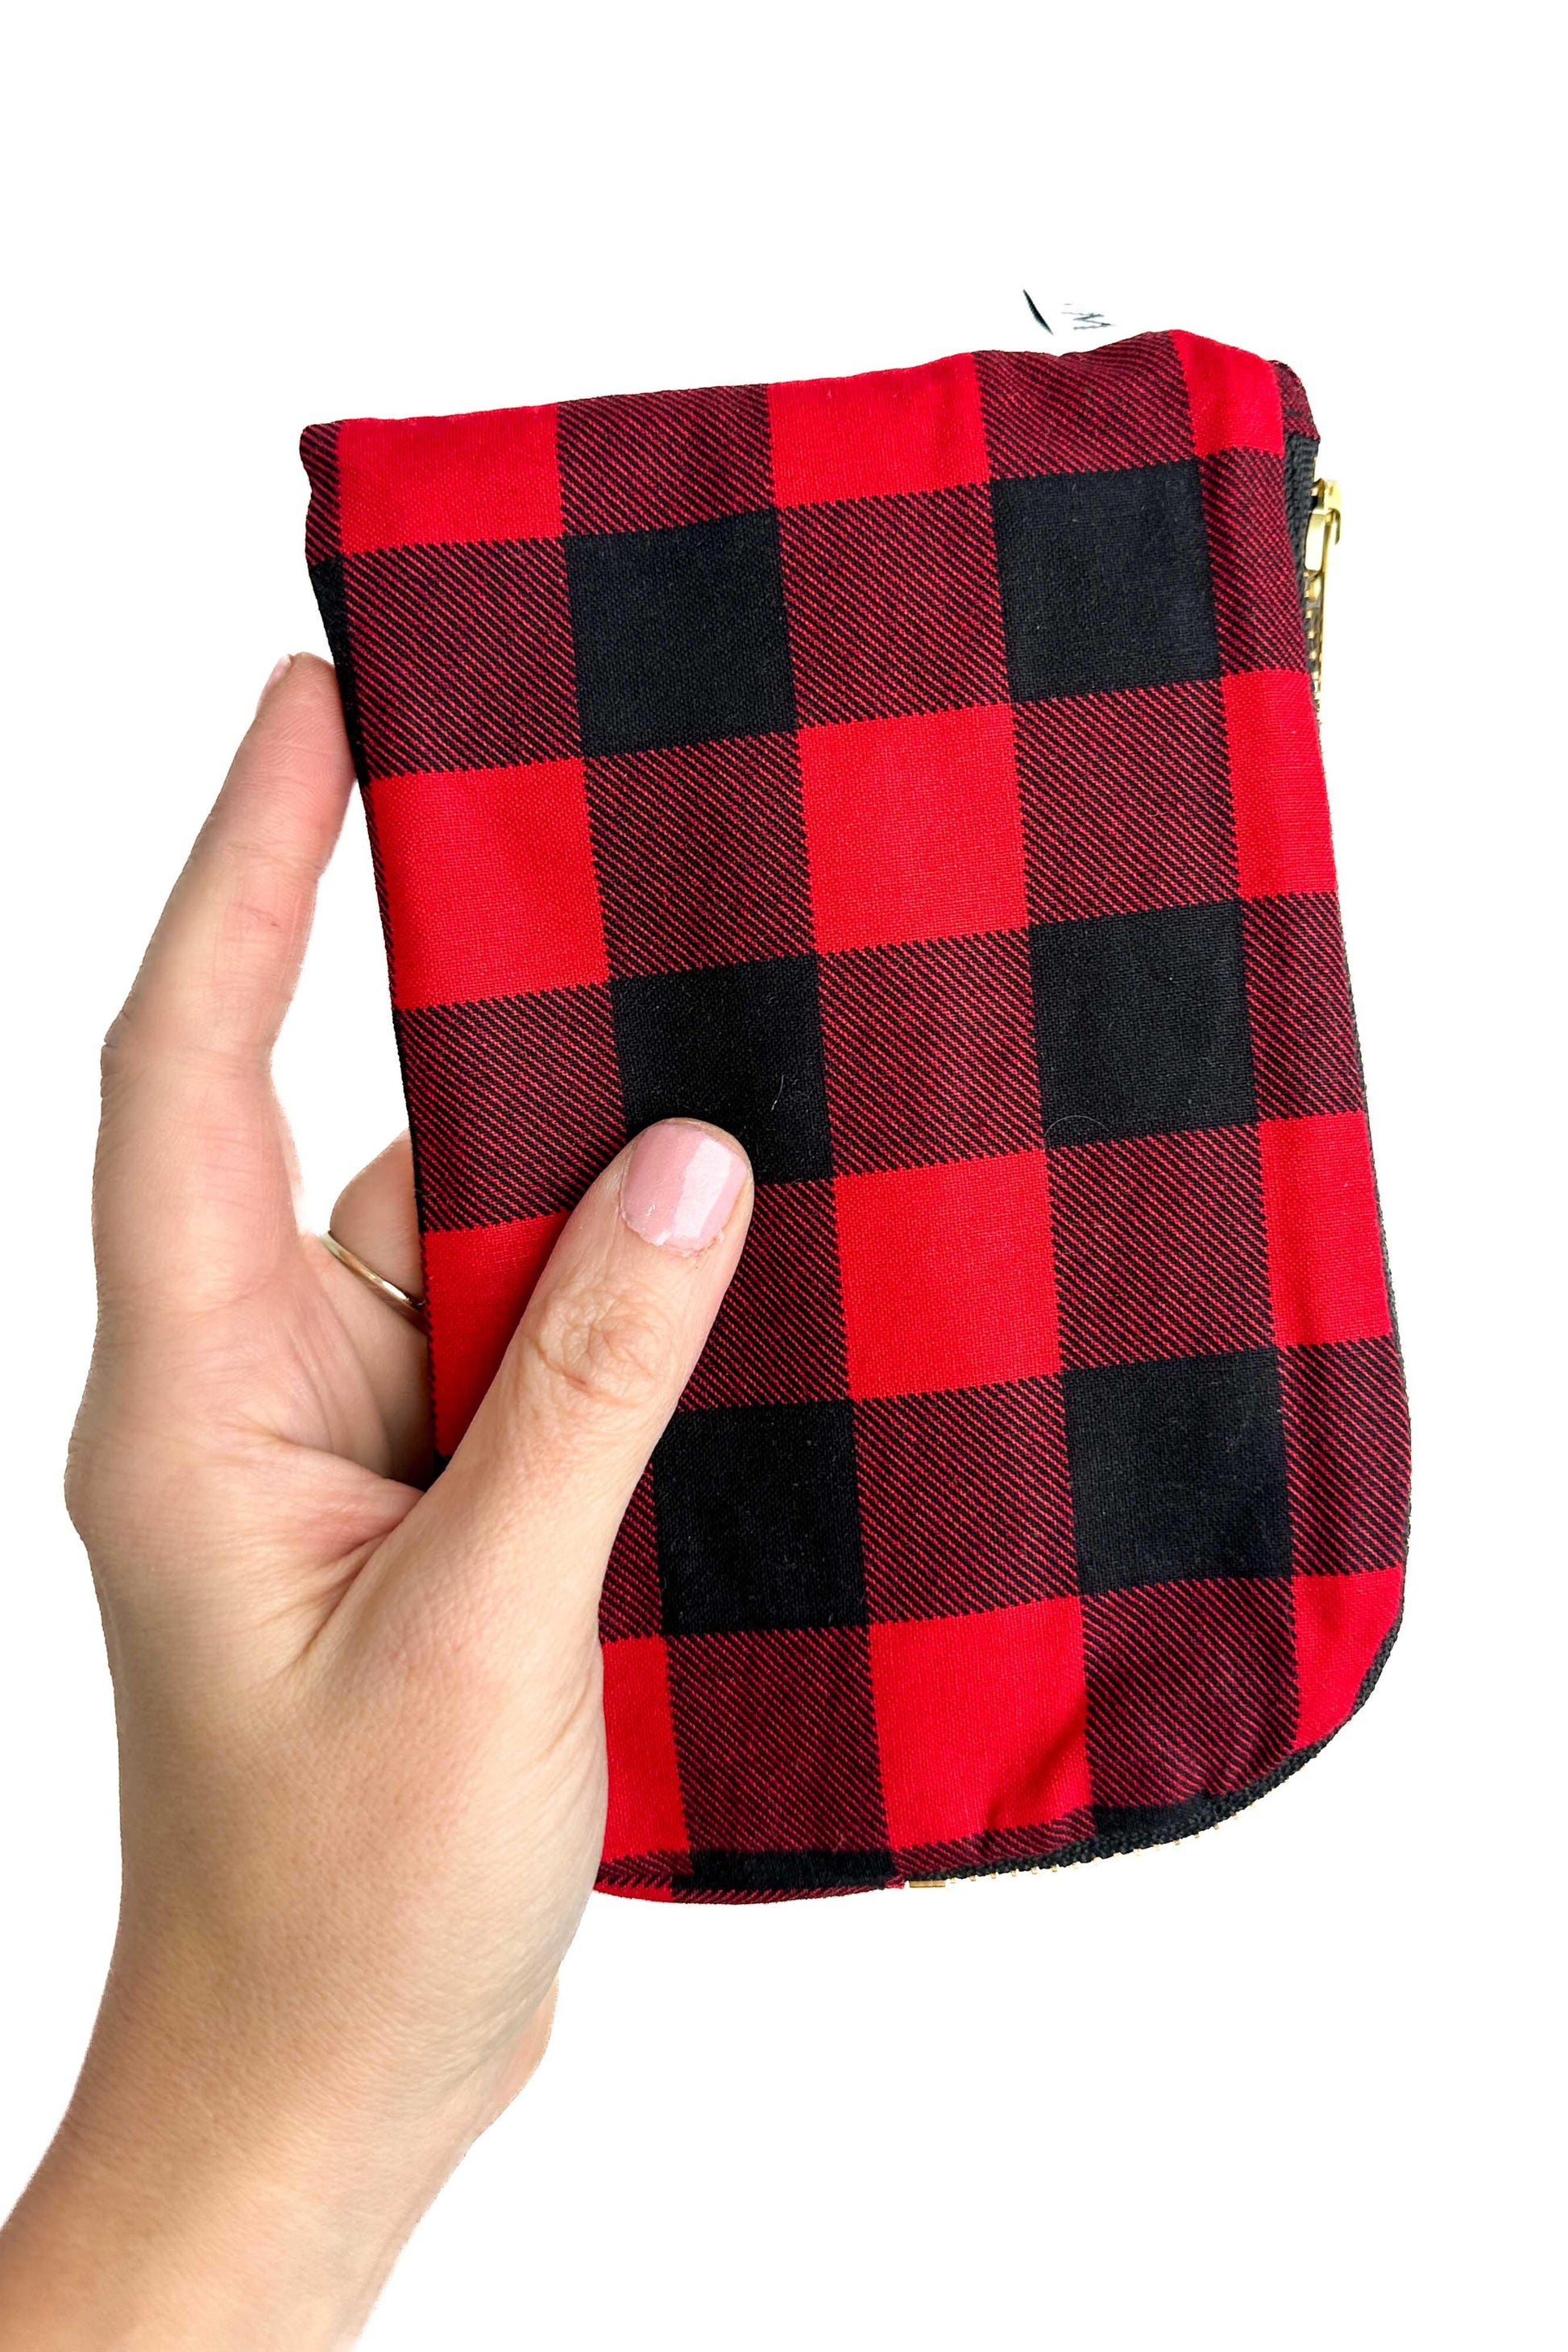 Buffalo Plaid Everyday Travel Bag with Compartments READY TO SHIP - Modern Makerie